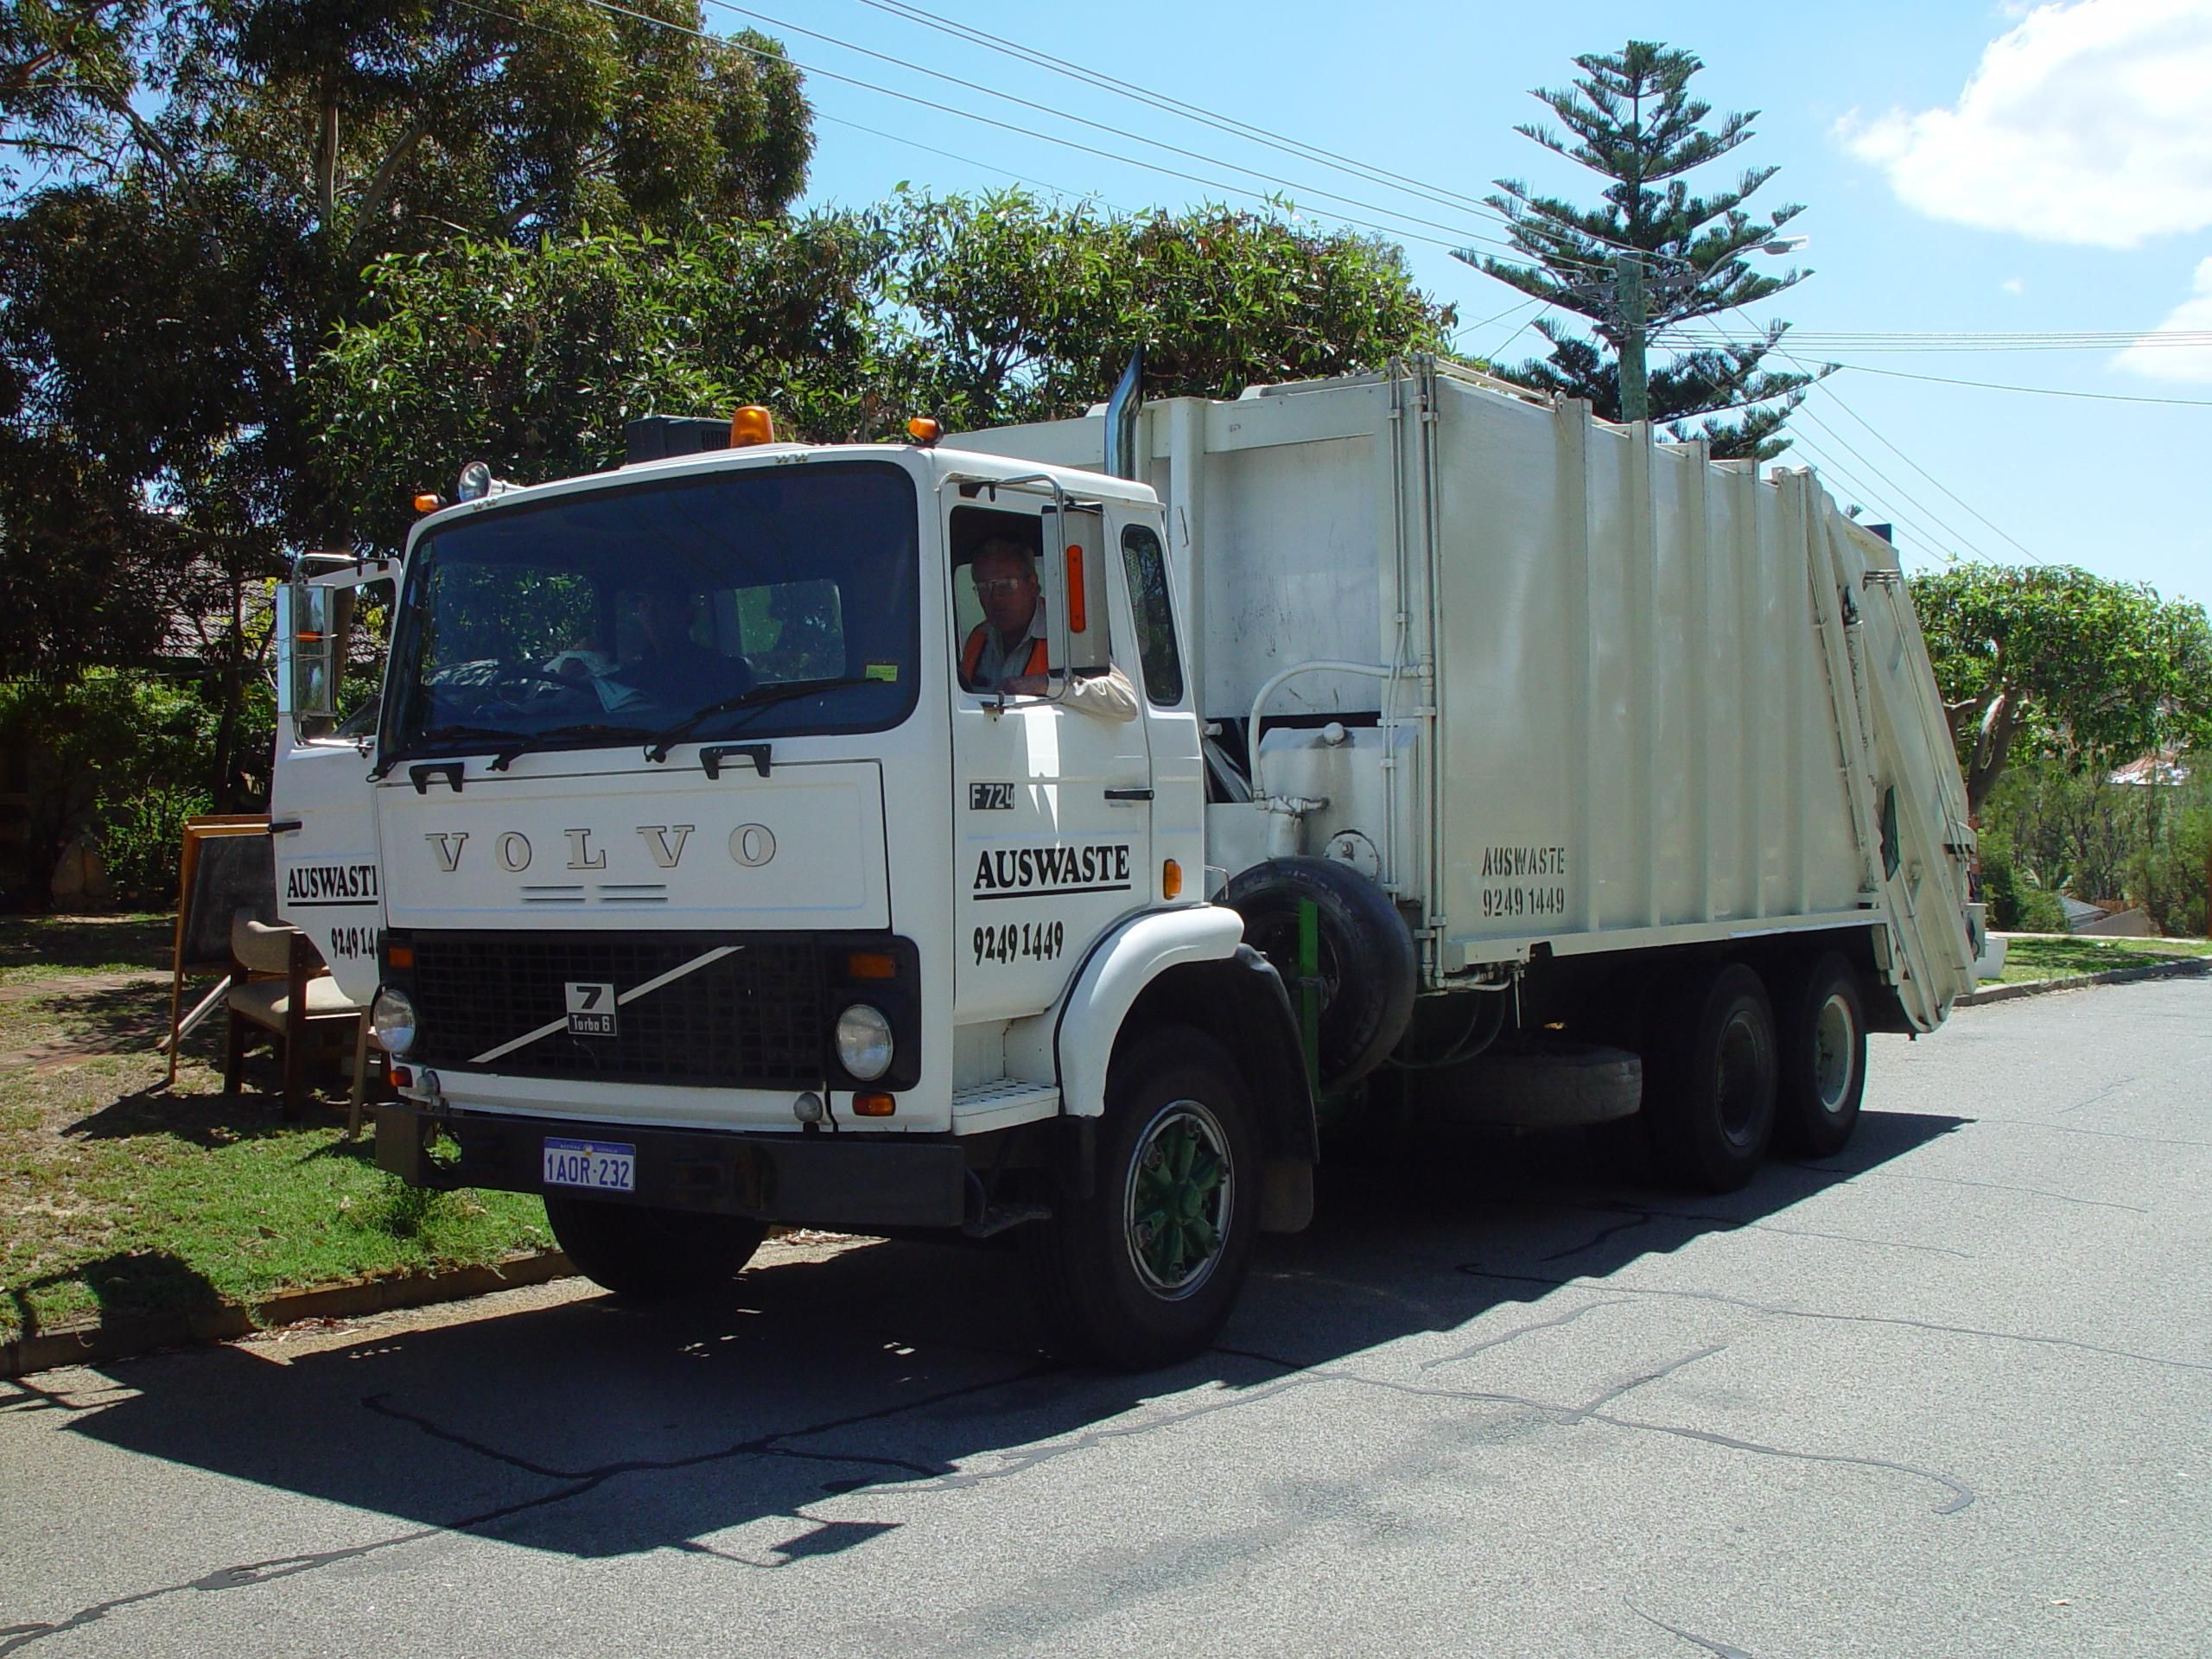 A garbage truck may not drive out to rural communities  Photo Credit: Wikimedia Commons